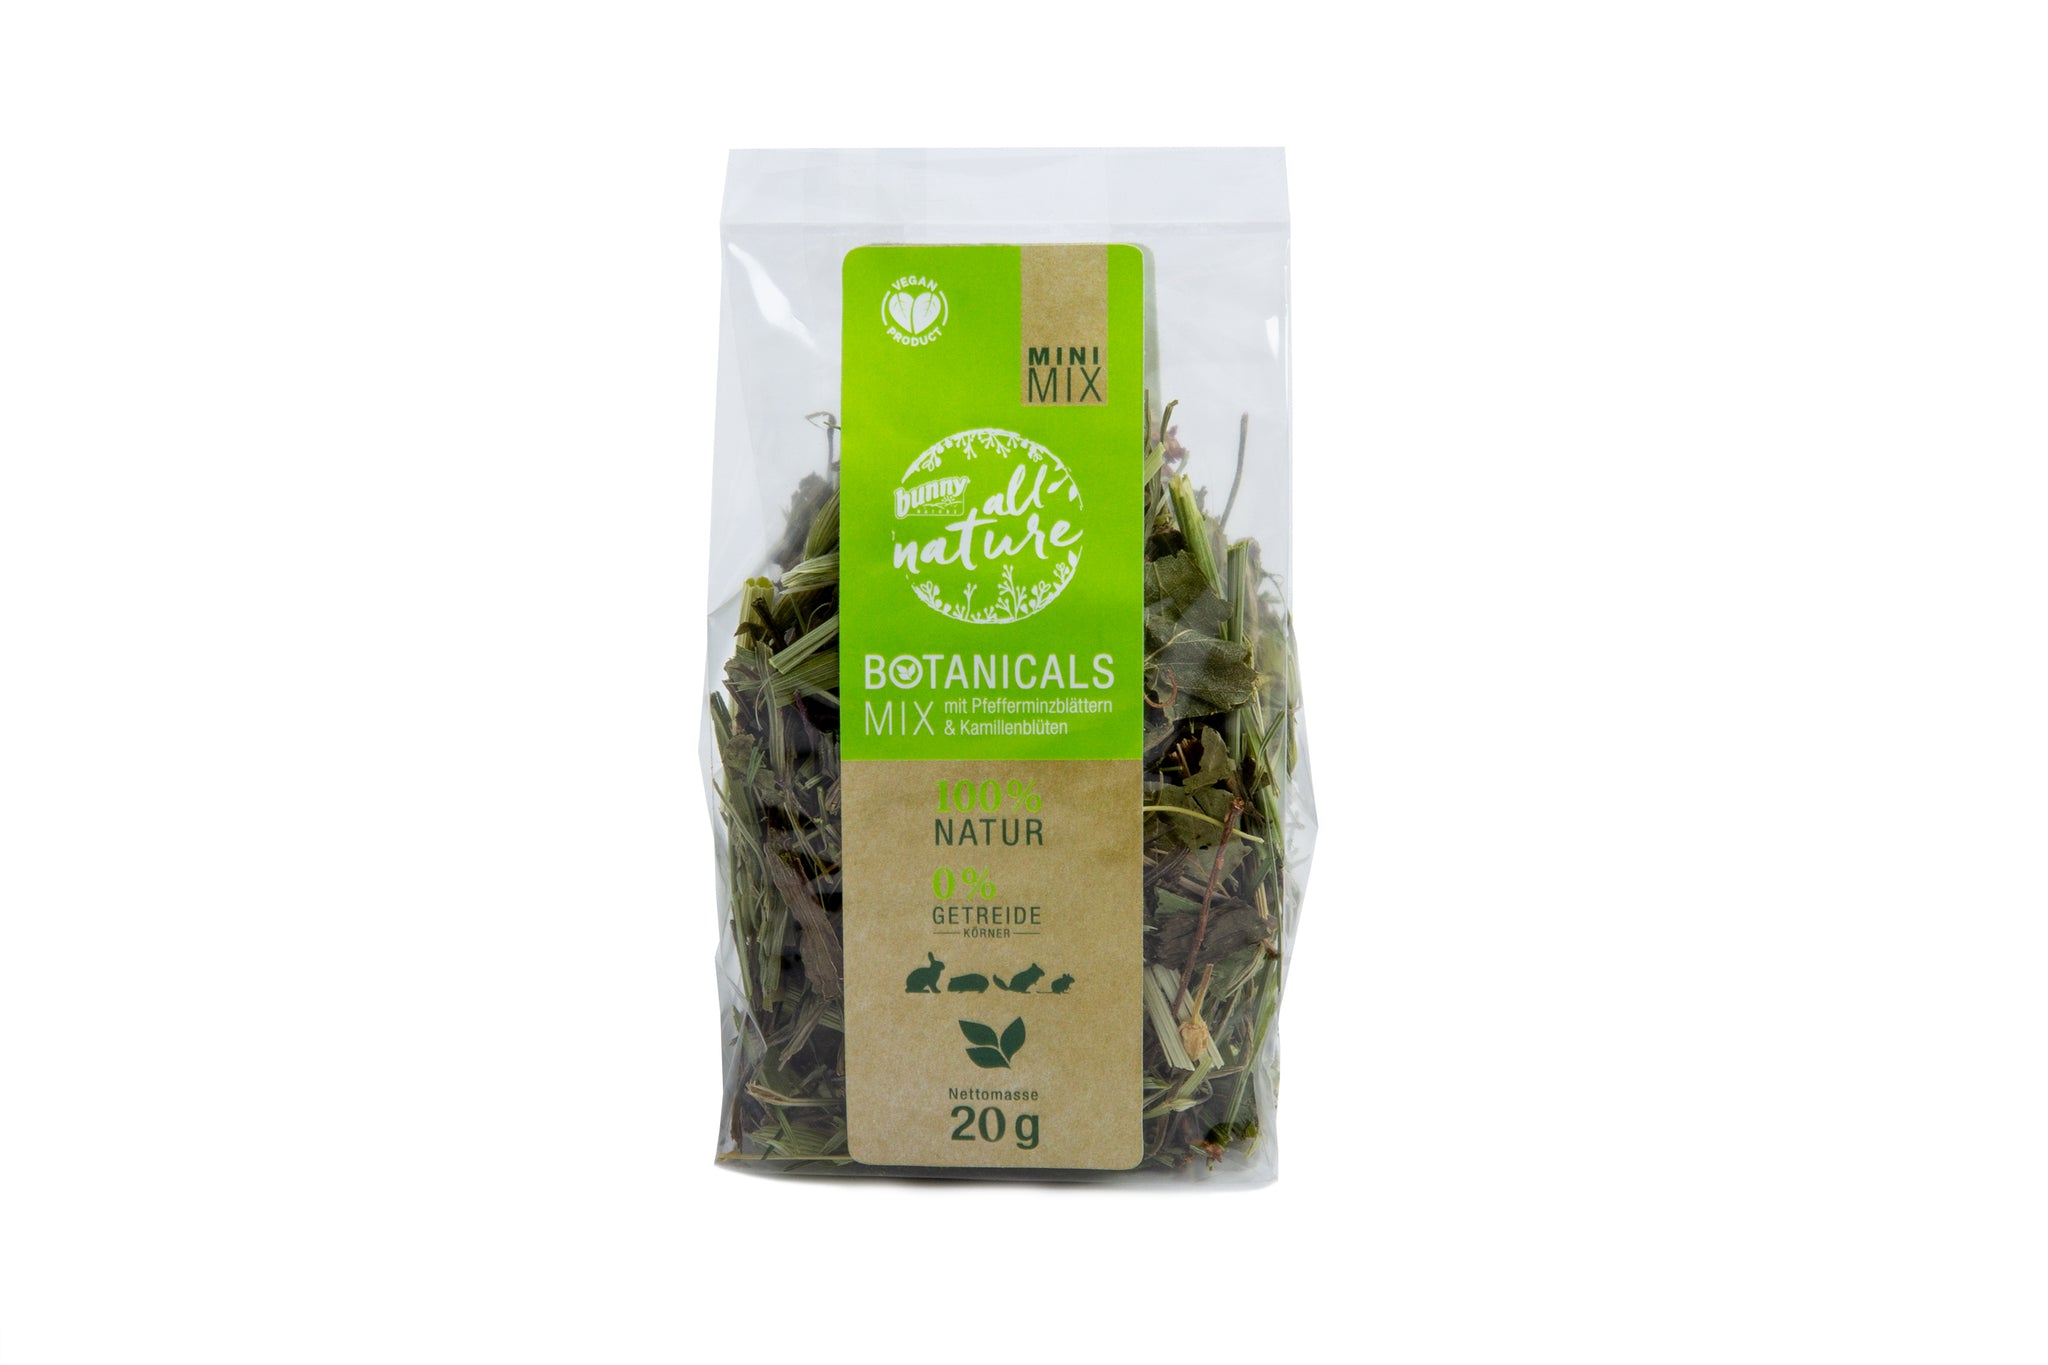 Botanicals Mini Mix Peppermint Leaves and Camomile Blossoms 20g